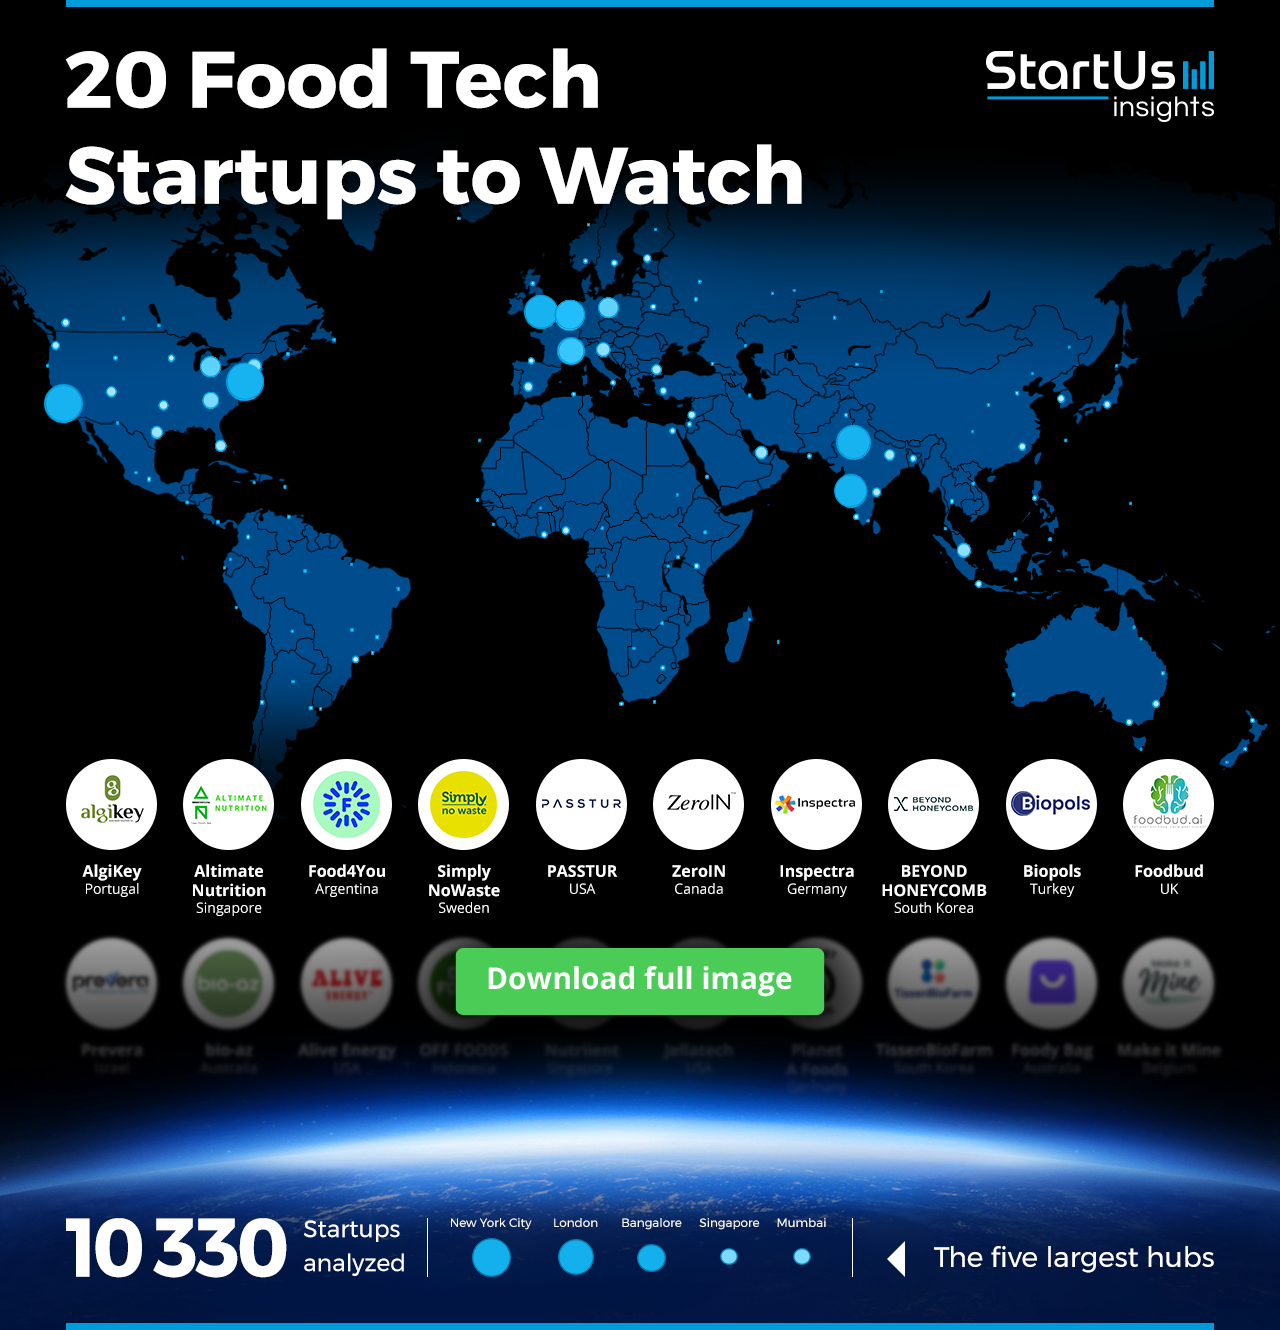 Food-Tech-Startups-to-Watch-Heat-Map-Blurred-StartUs-Insights-noresize